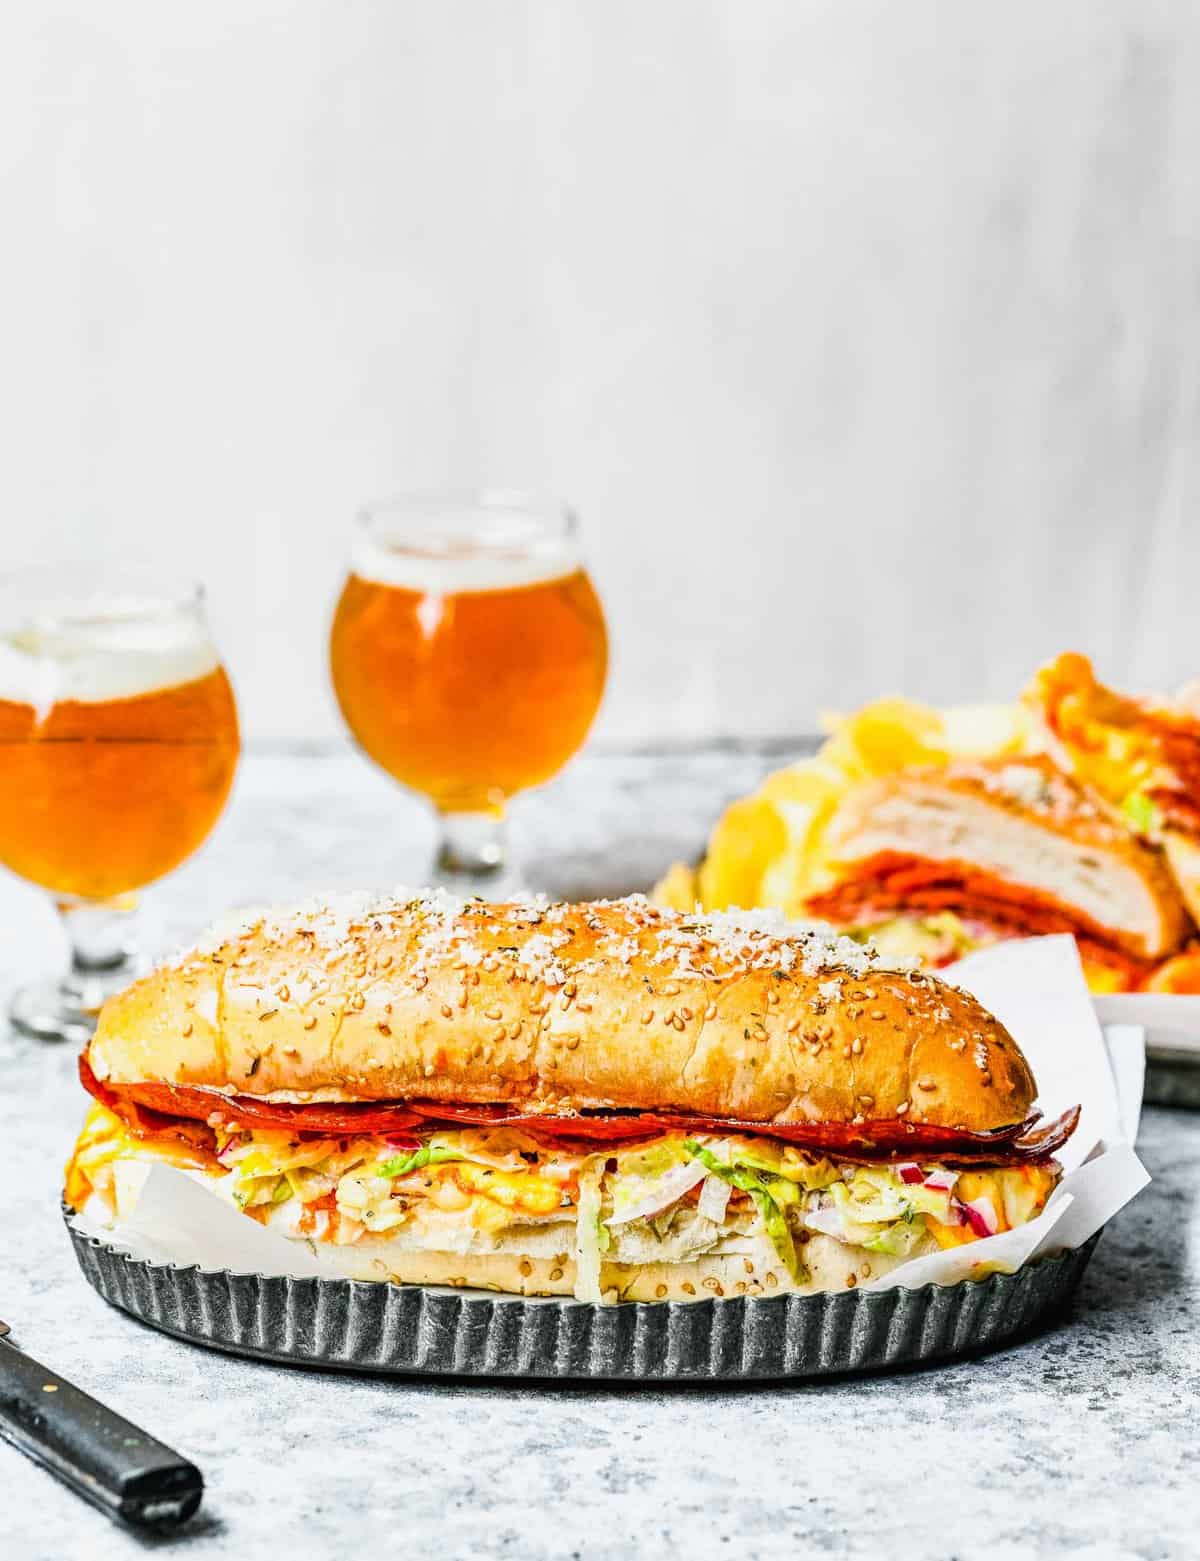 A large grinder sandwich on a tray, with two glasses of beer and a bag of chips in the background